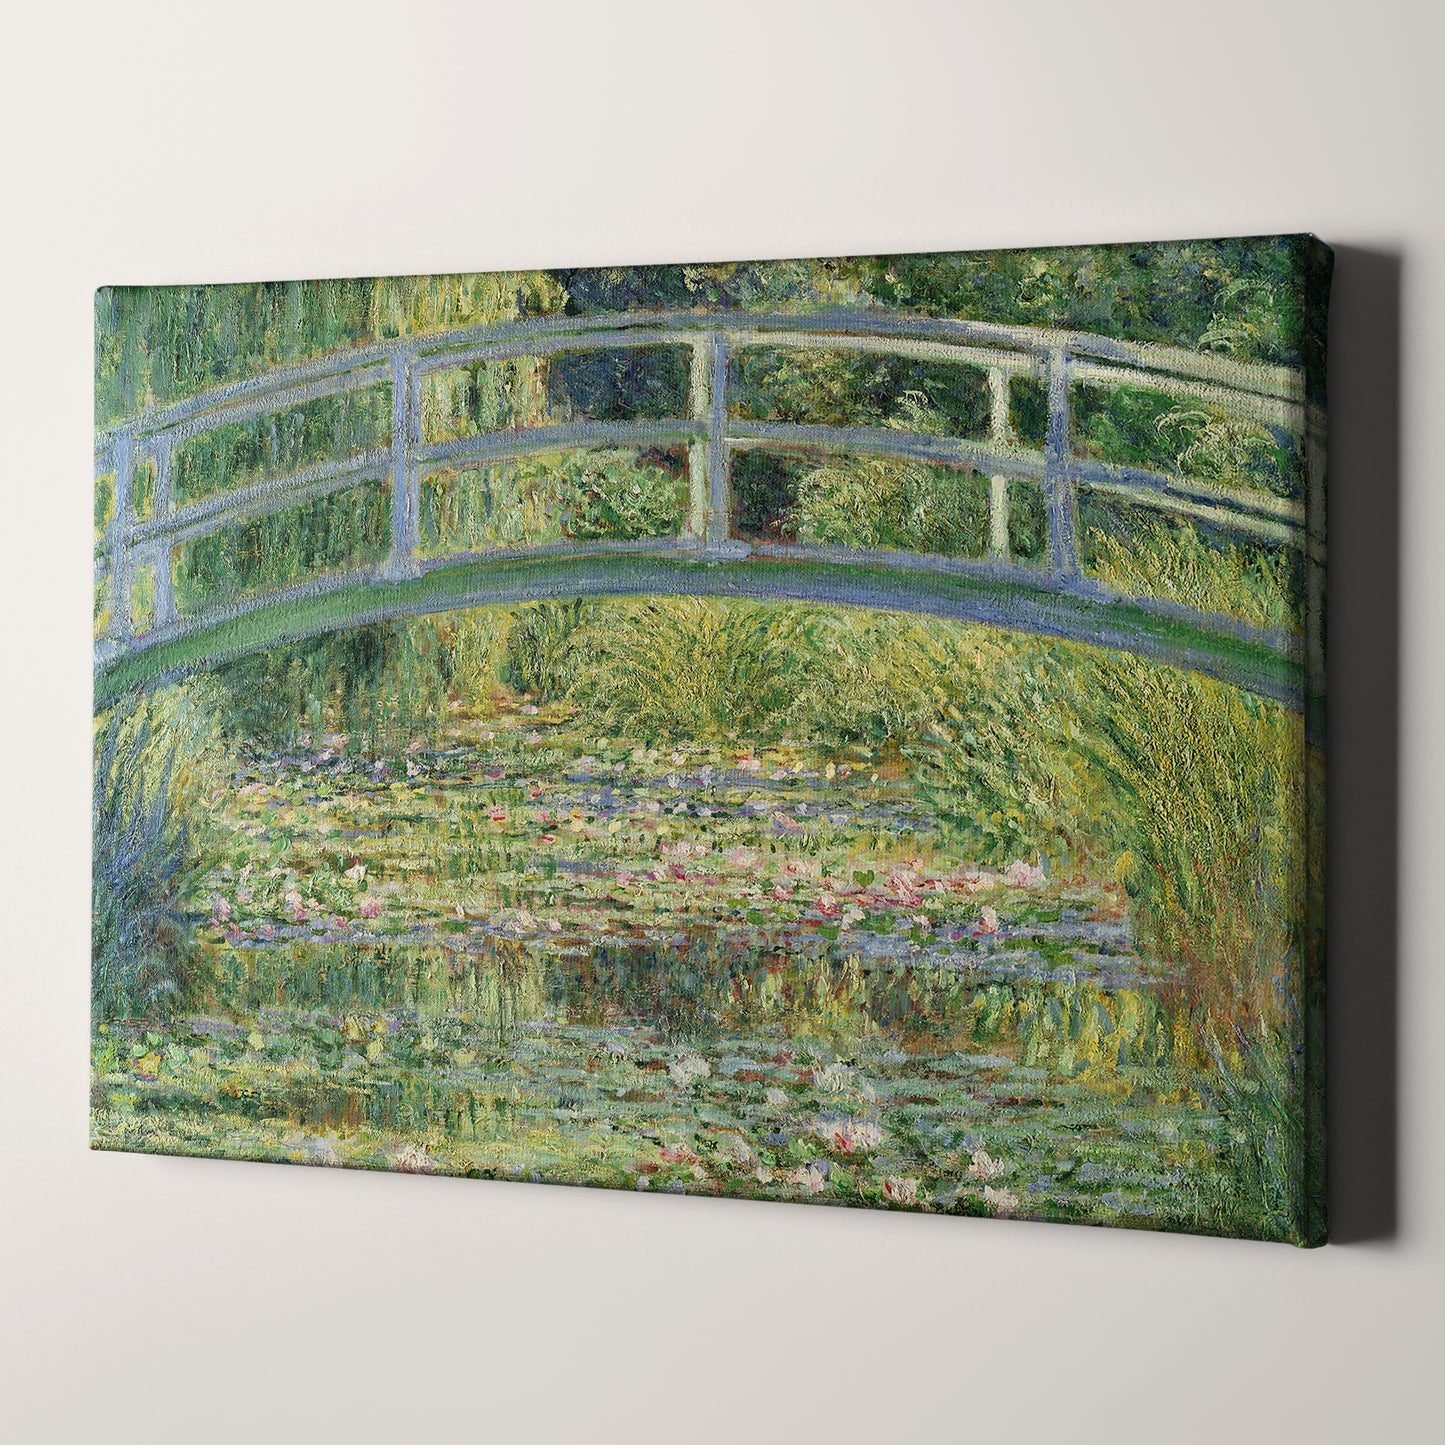 Bridge over a Pond of Water Lilies by Monet